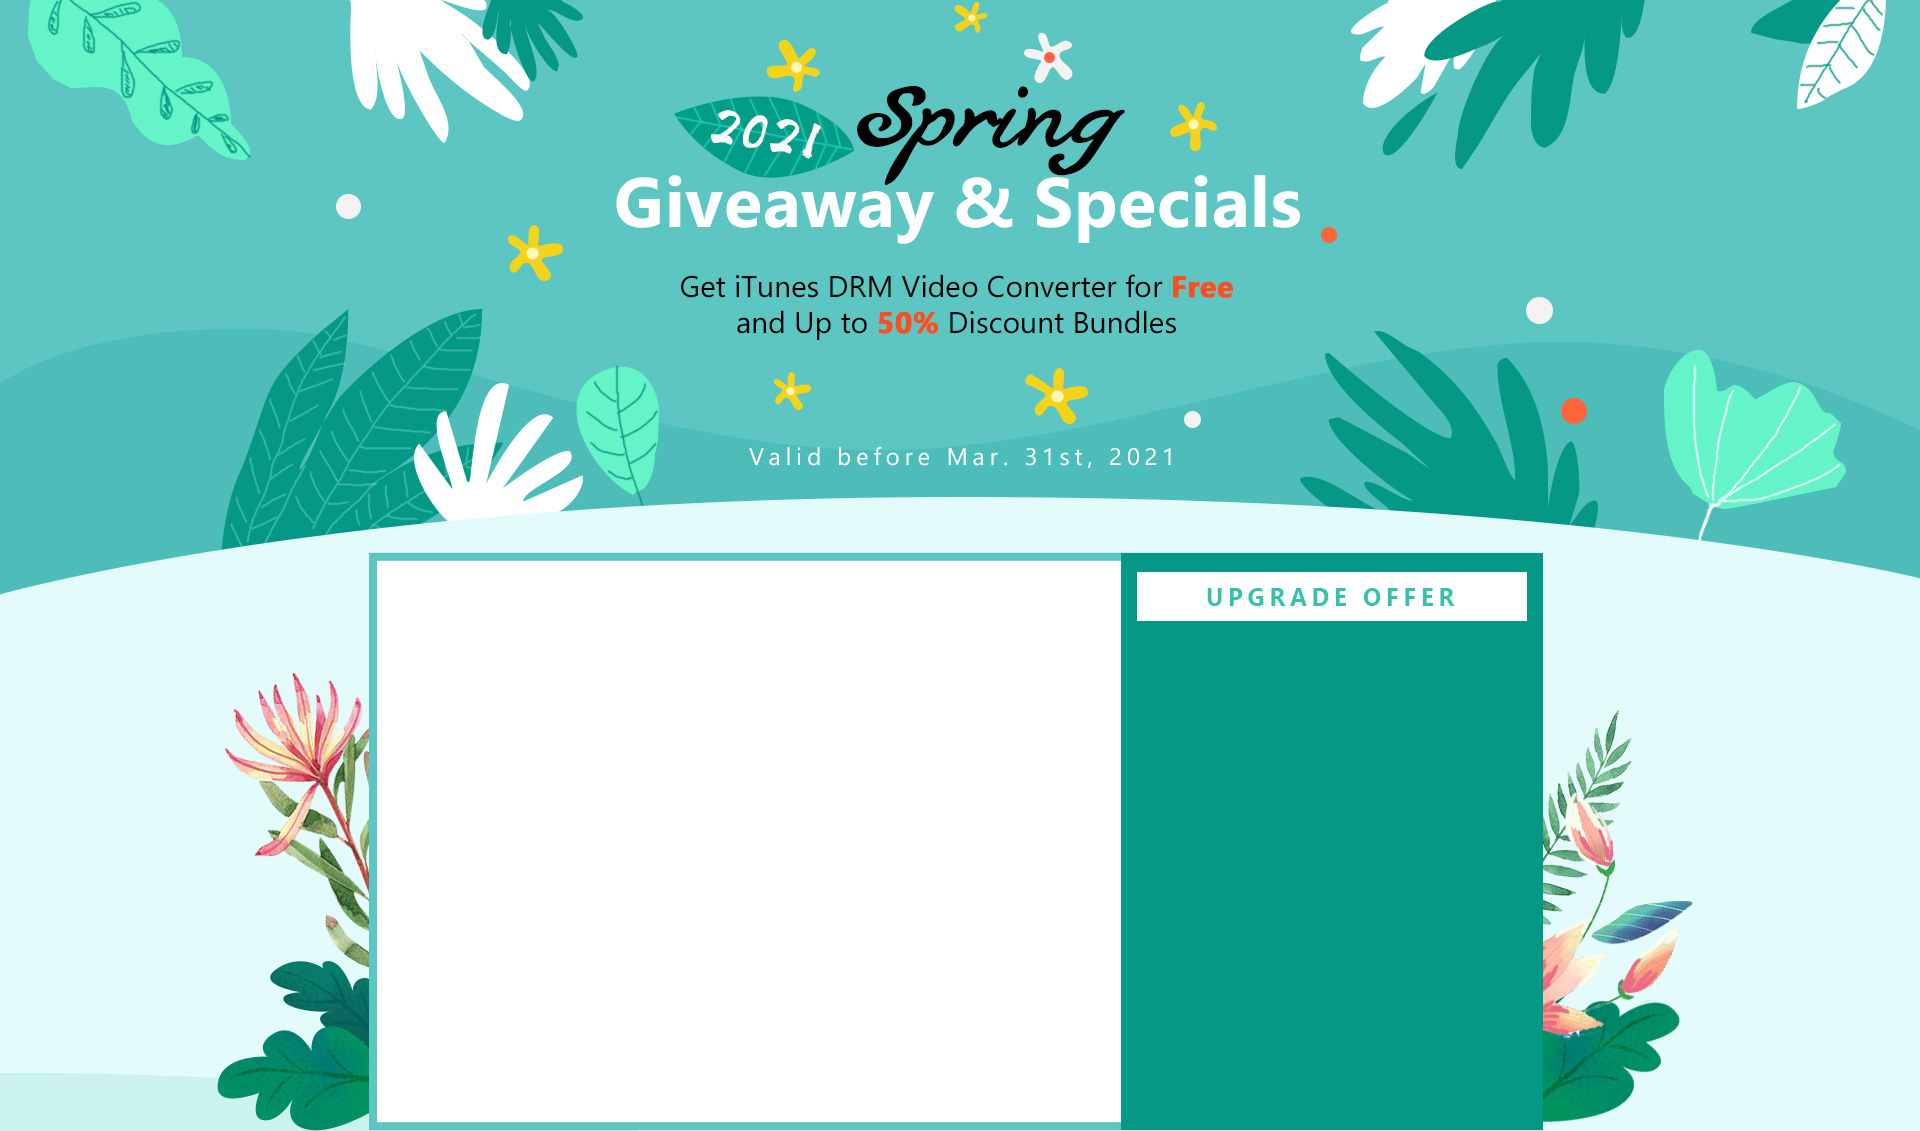 leawo-prof.-drm-video-converter-–-2021-spring-giveaway